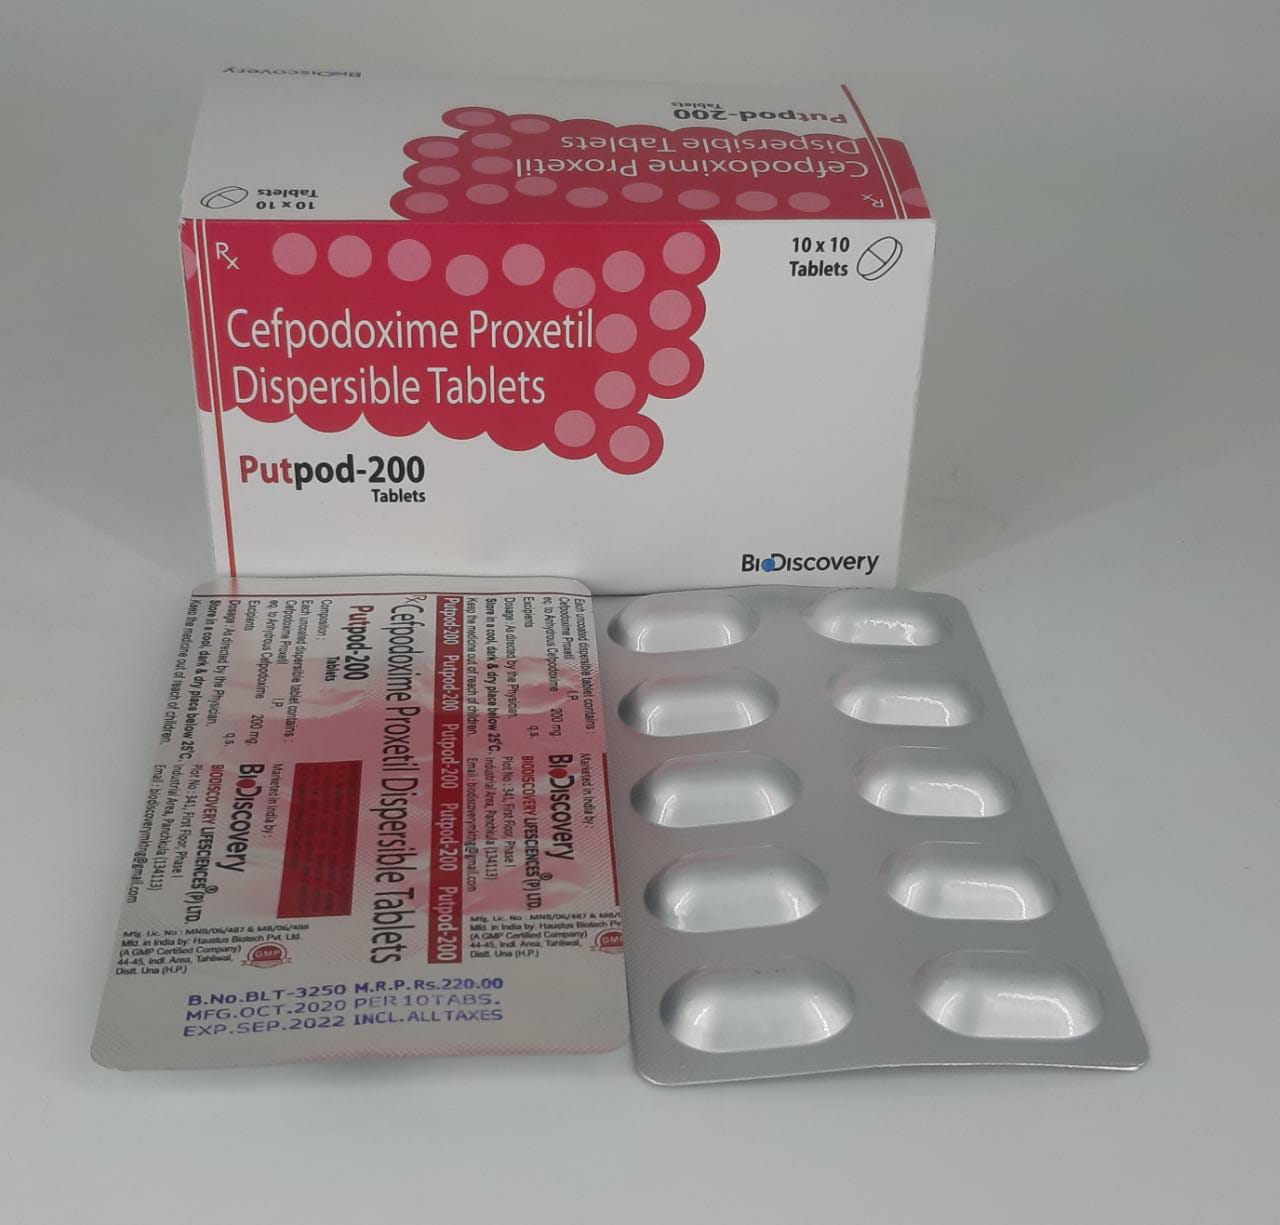 Product Name: Putpod 200, Compositions of Cefpodoxime Proxetil Dispersable Tablets are Cefpodoxime Proxetil Dispersable Tablets - Biodiscovery Lifesciences Pvt Ltd